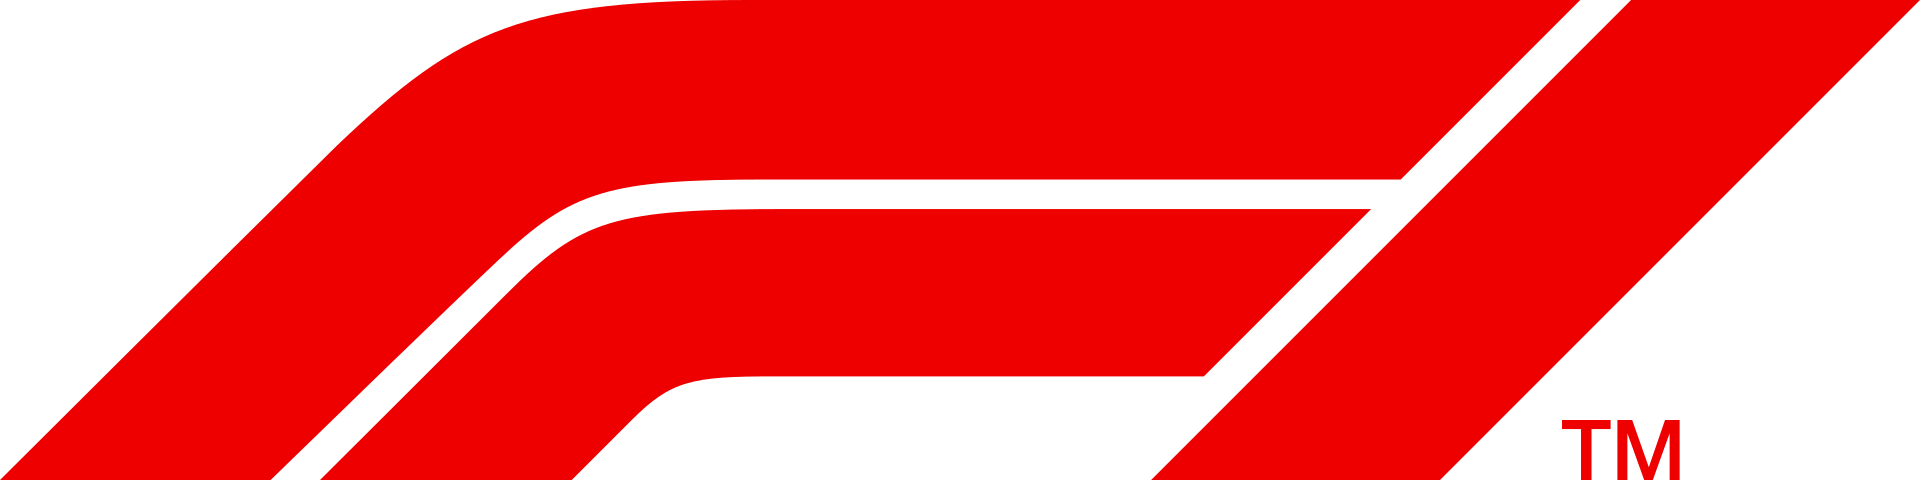 1920px-F1.svg.png